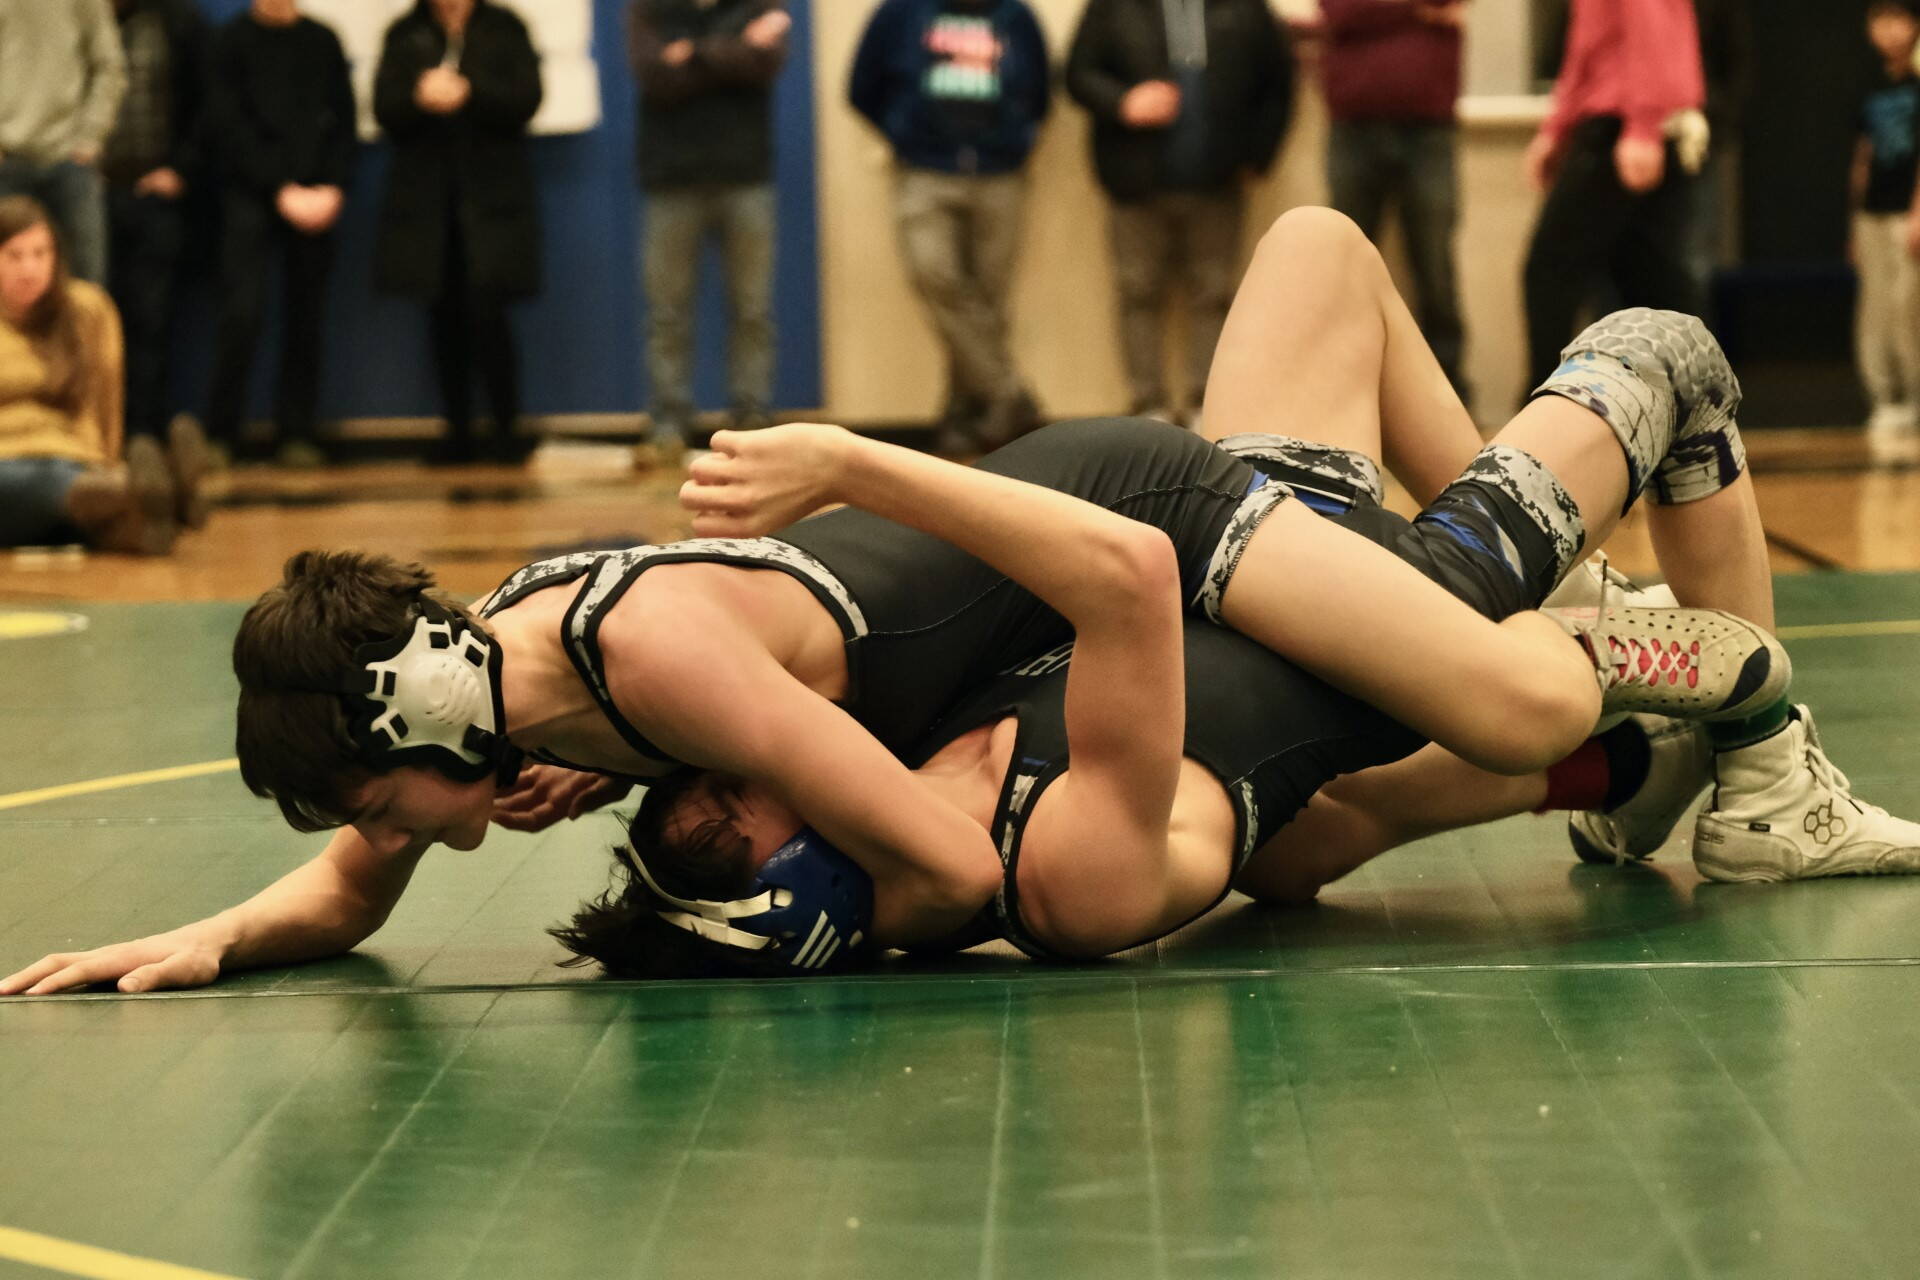 Thunder Mountain High School freshman Camden Messmer pins teammate Landyn Dunn in the 112-pound Division I championship match of the 2023 ASAA Region V wrestling tournament Saturday at THMS. (Klas Stolpe/ For the Juneau Empire)